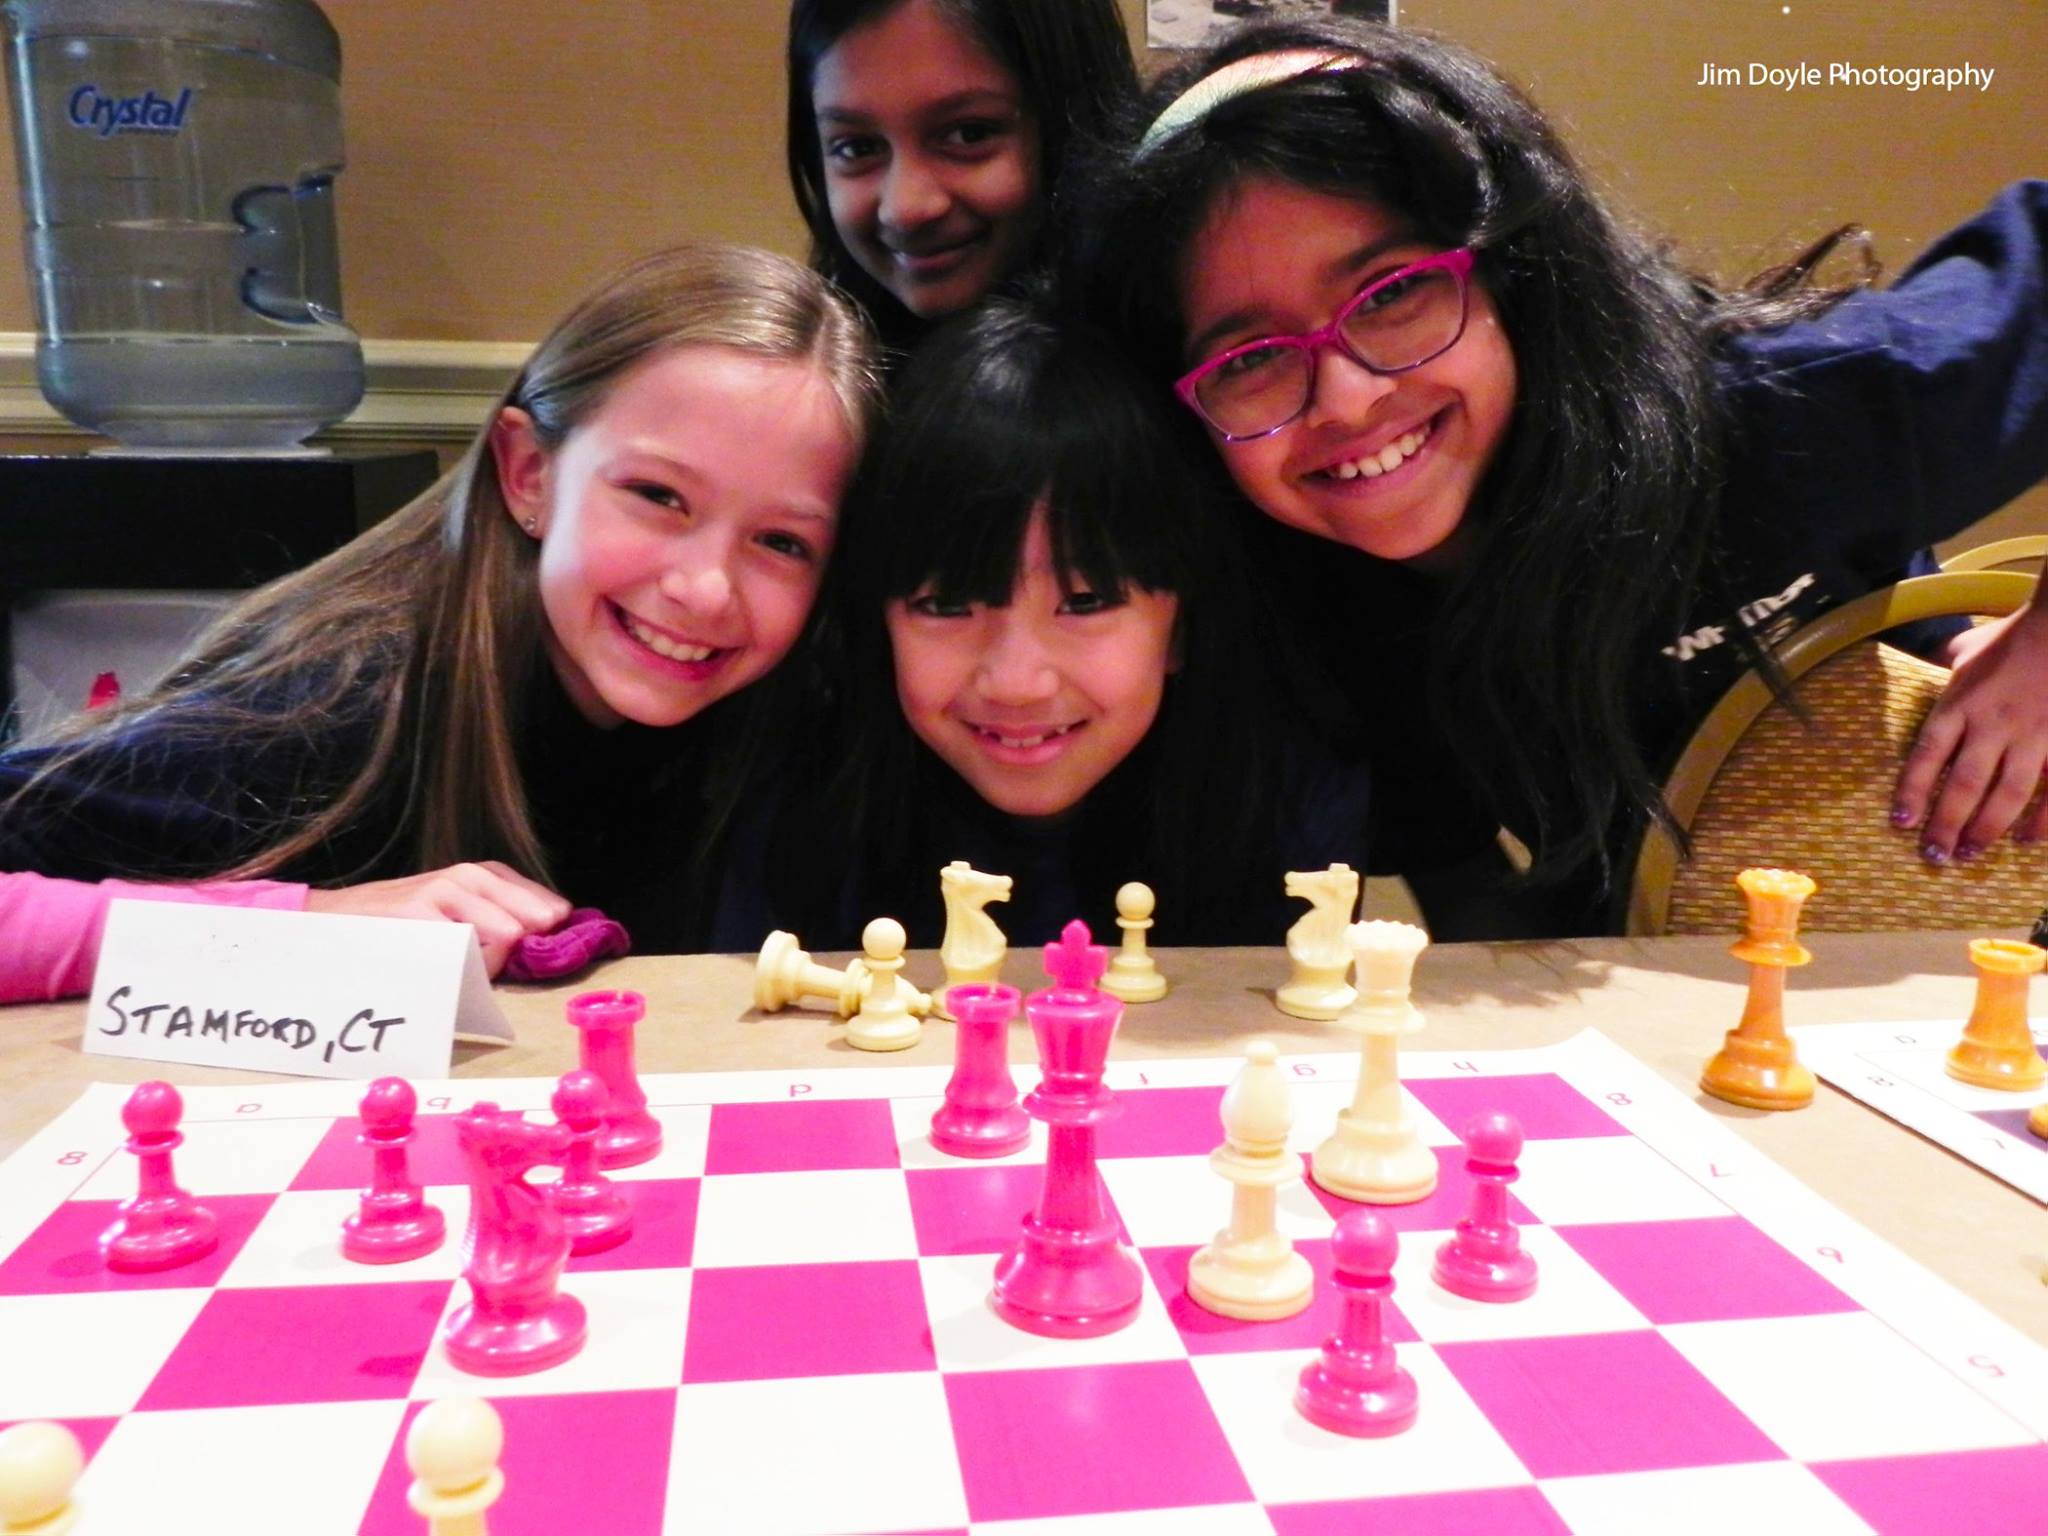 The Girls Club room as organized by US Chess's Women's Committee